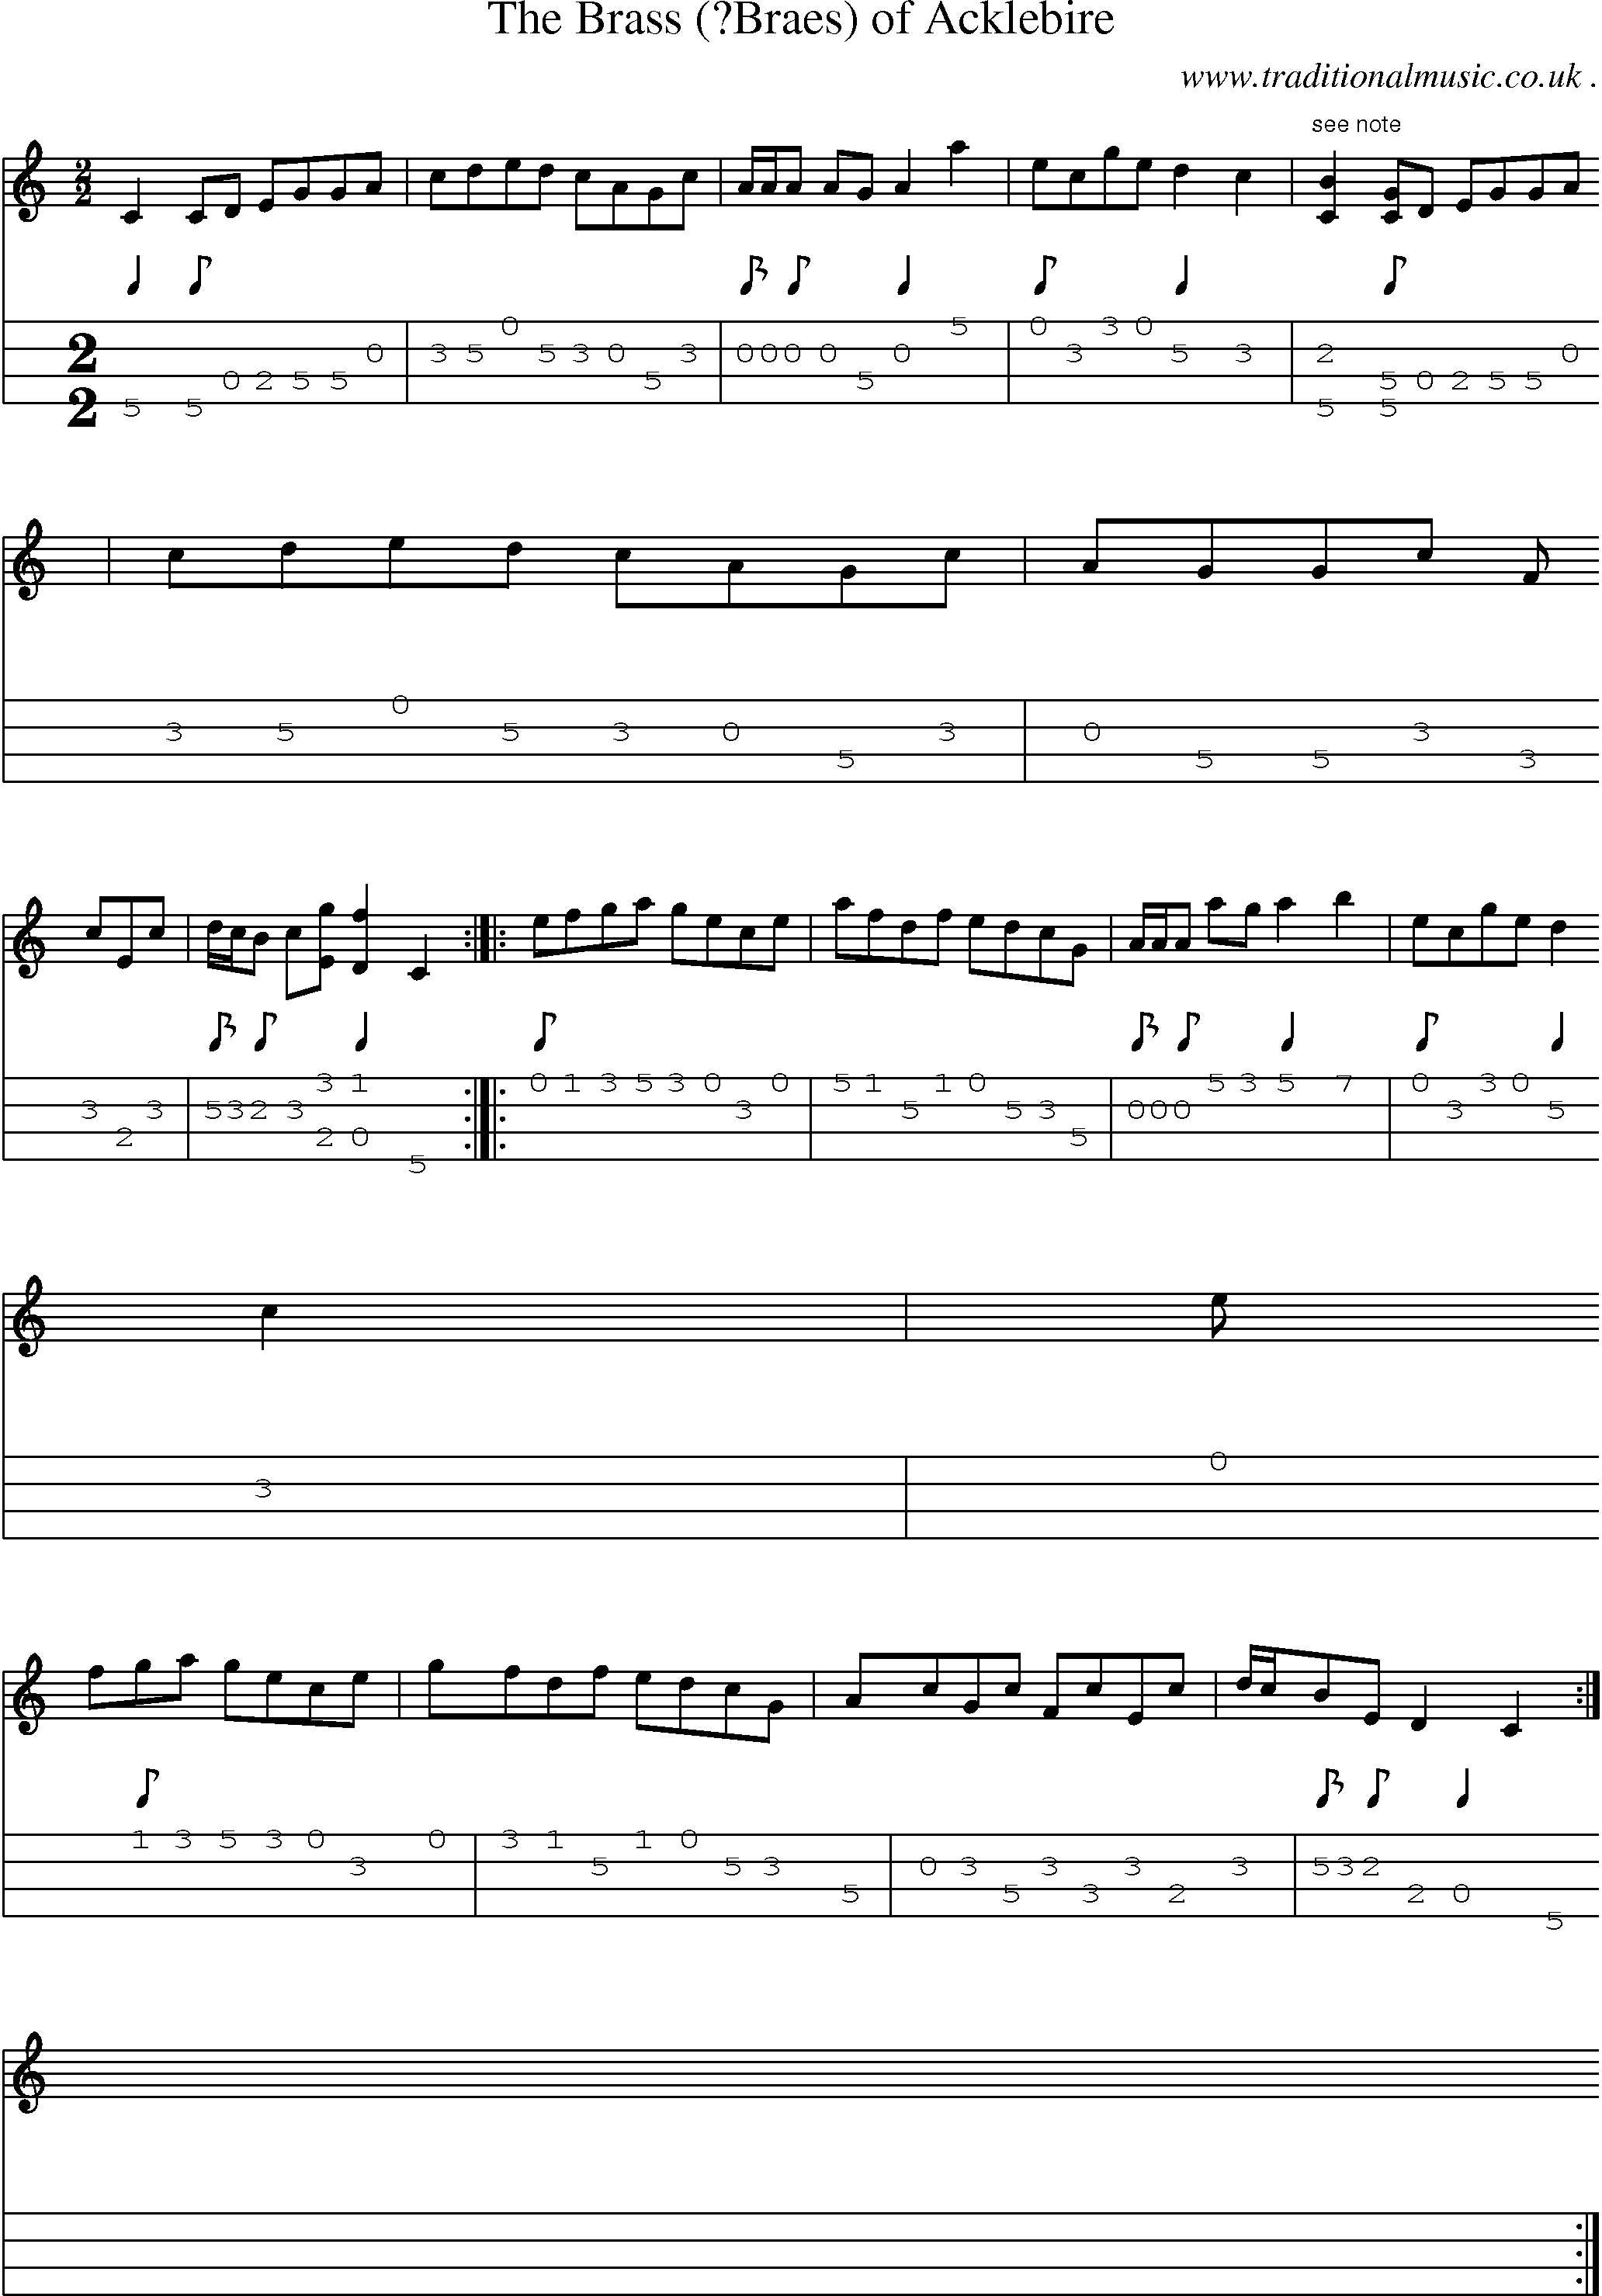 Sheet-Music and Mandolin Tabs for The Brass (braes) Of Acklebire